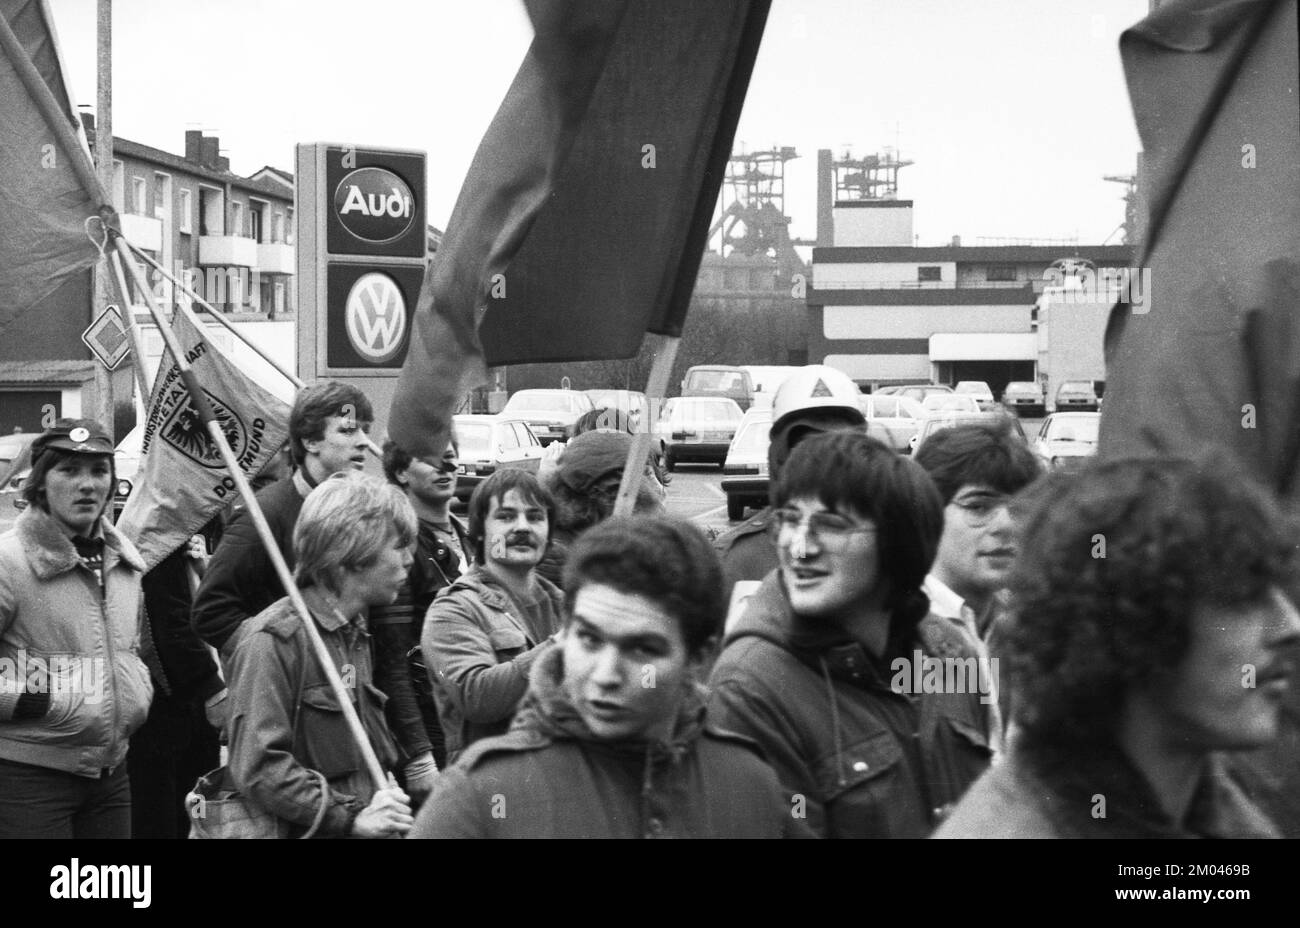 70, 000 steelworkers, trade unions, friends and relatives demonstrated for the preservation of the Hoesch AG steel site and jobs on 28.11.1980 in Dort Stock Photo